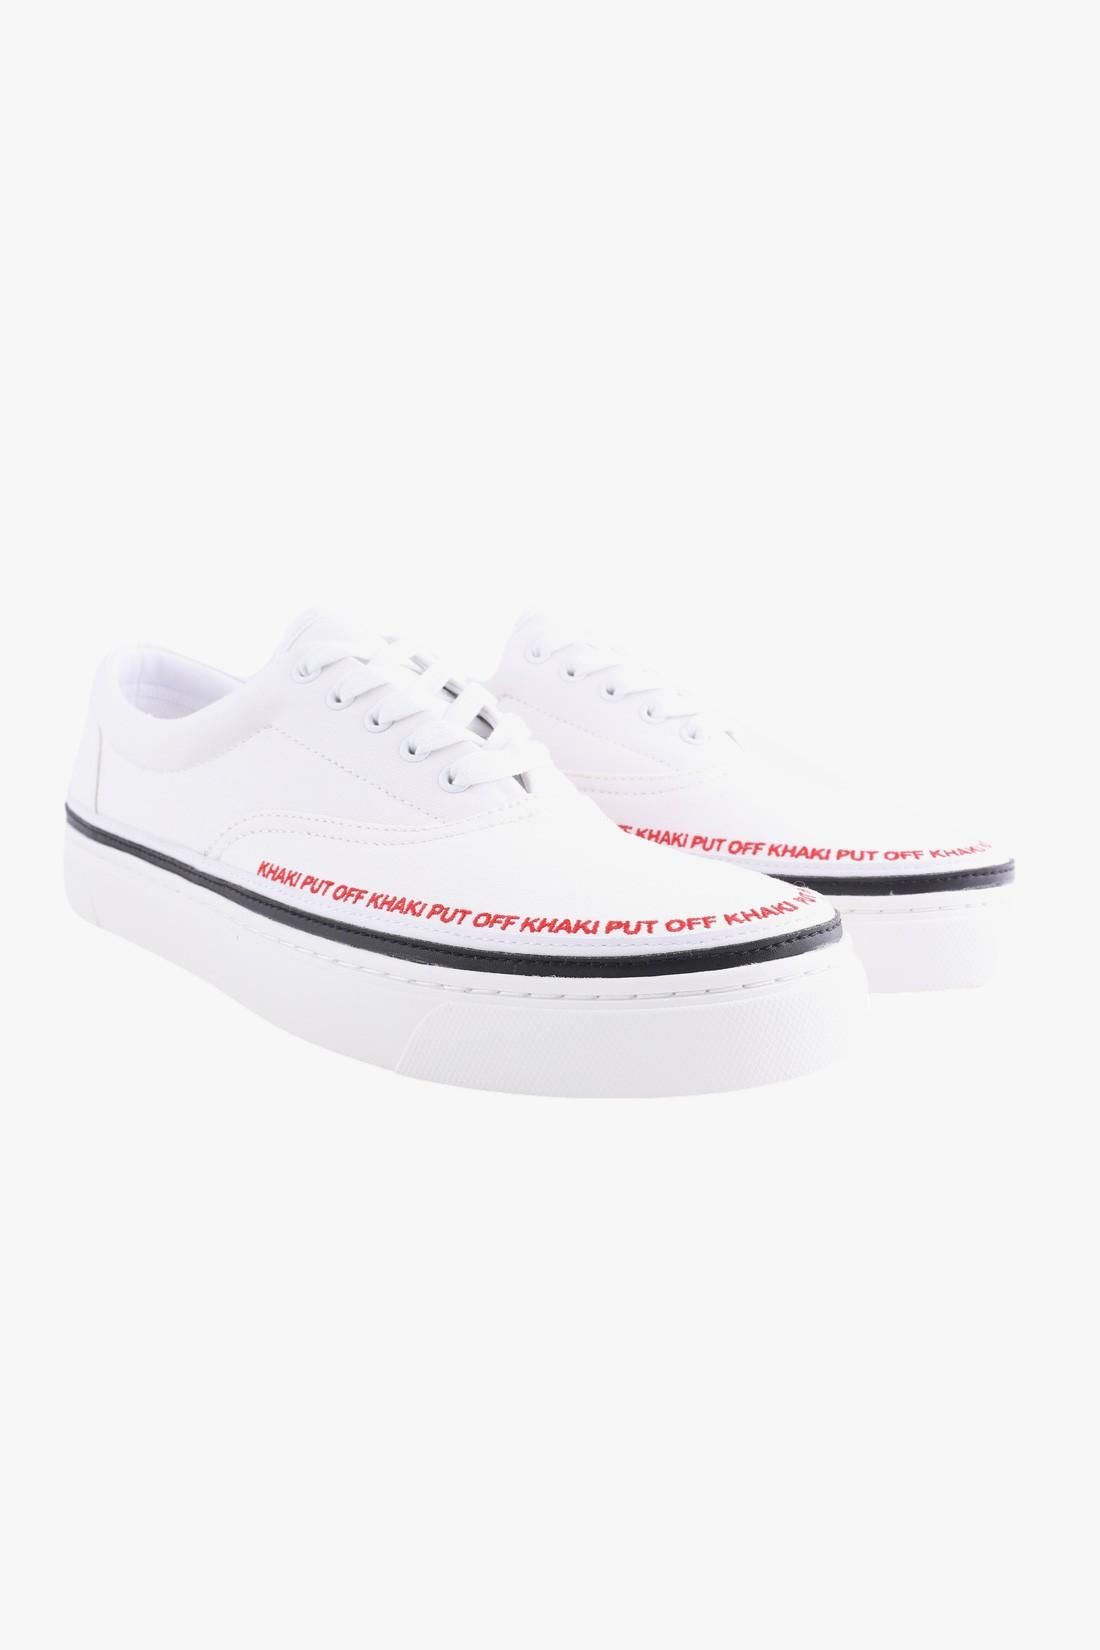 Shoes White